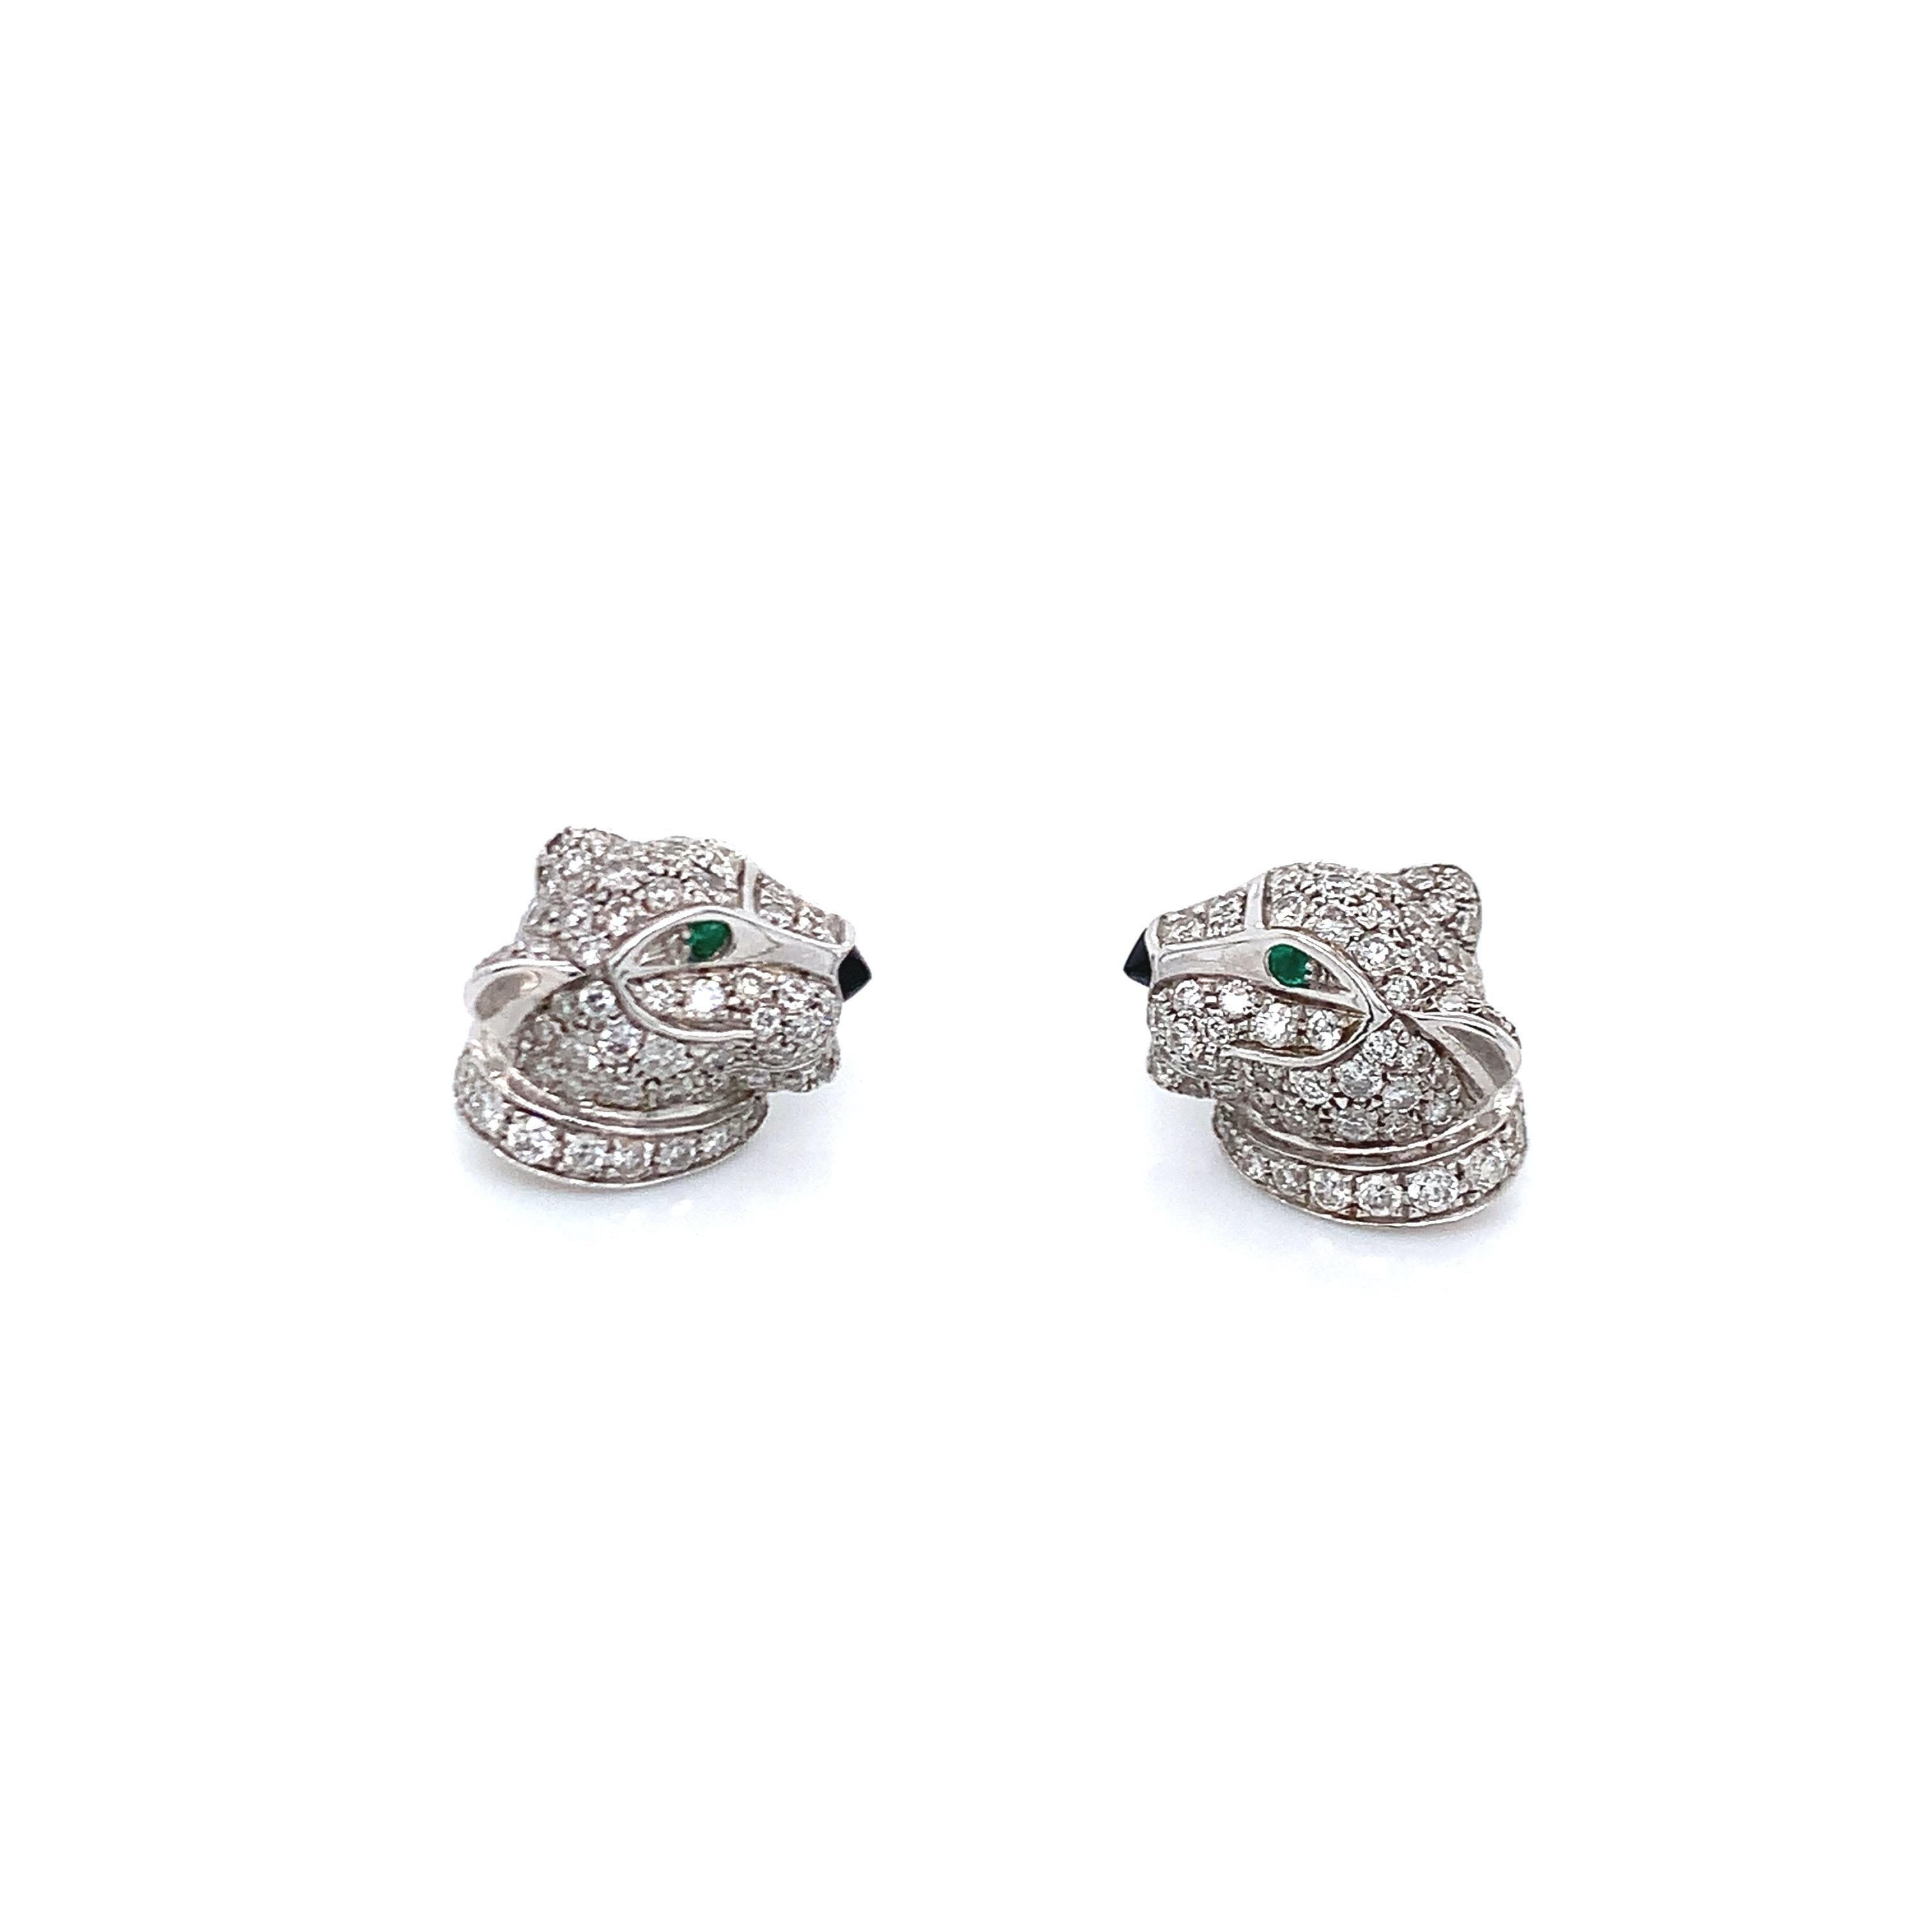 A timeless piece of jewelry earrings, the Panthére de Cartier earrings feature panthers covered with 63 brilliant-cut diamonds for a total of 0.77 carat. Emeralds signify the eyes, while the onyx represent the nose. Altogether, these stones are set